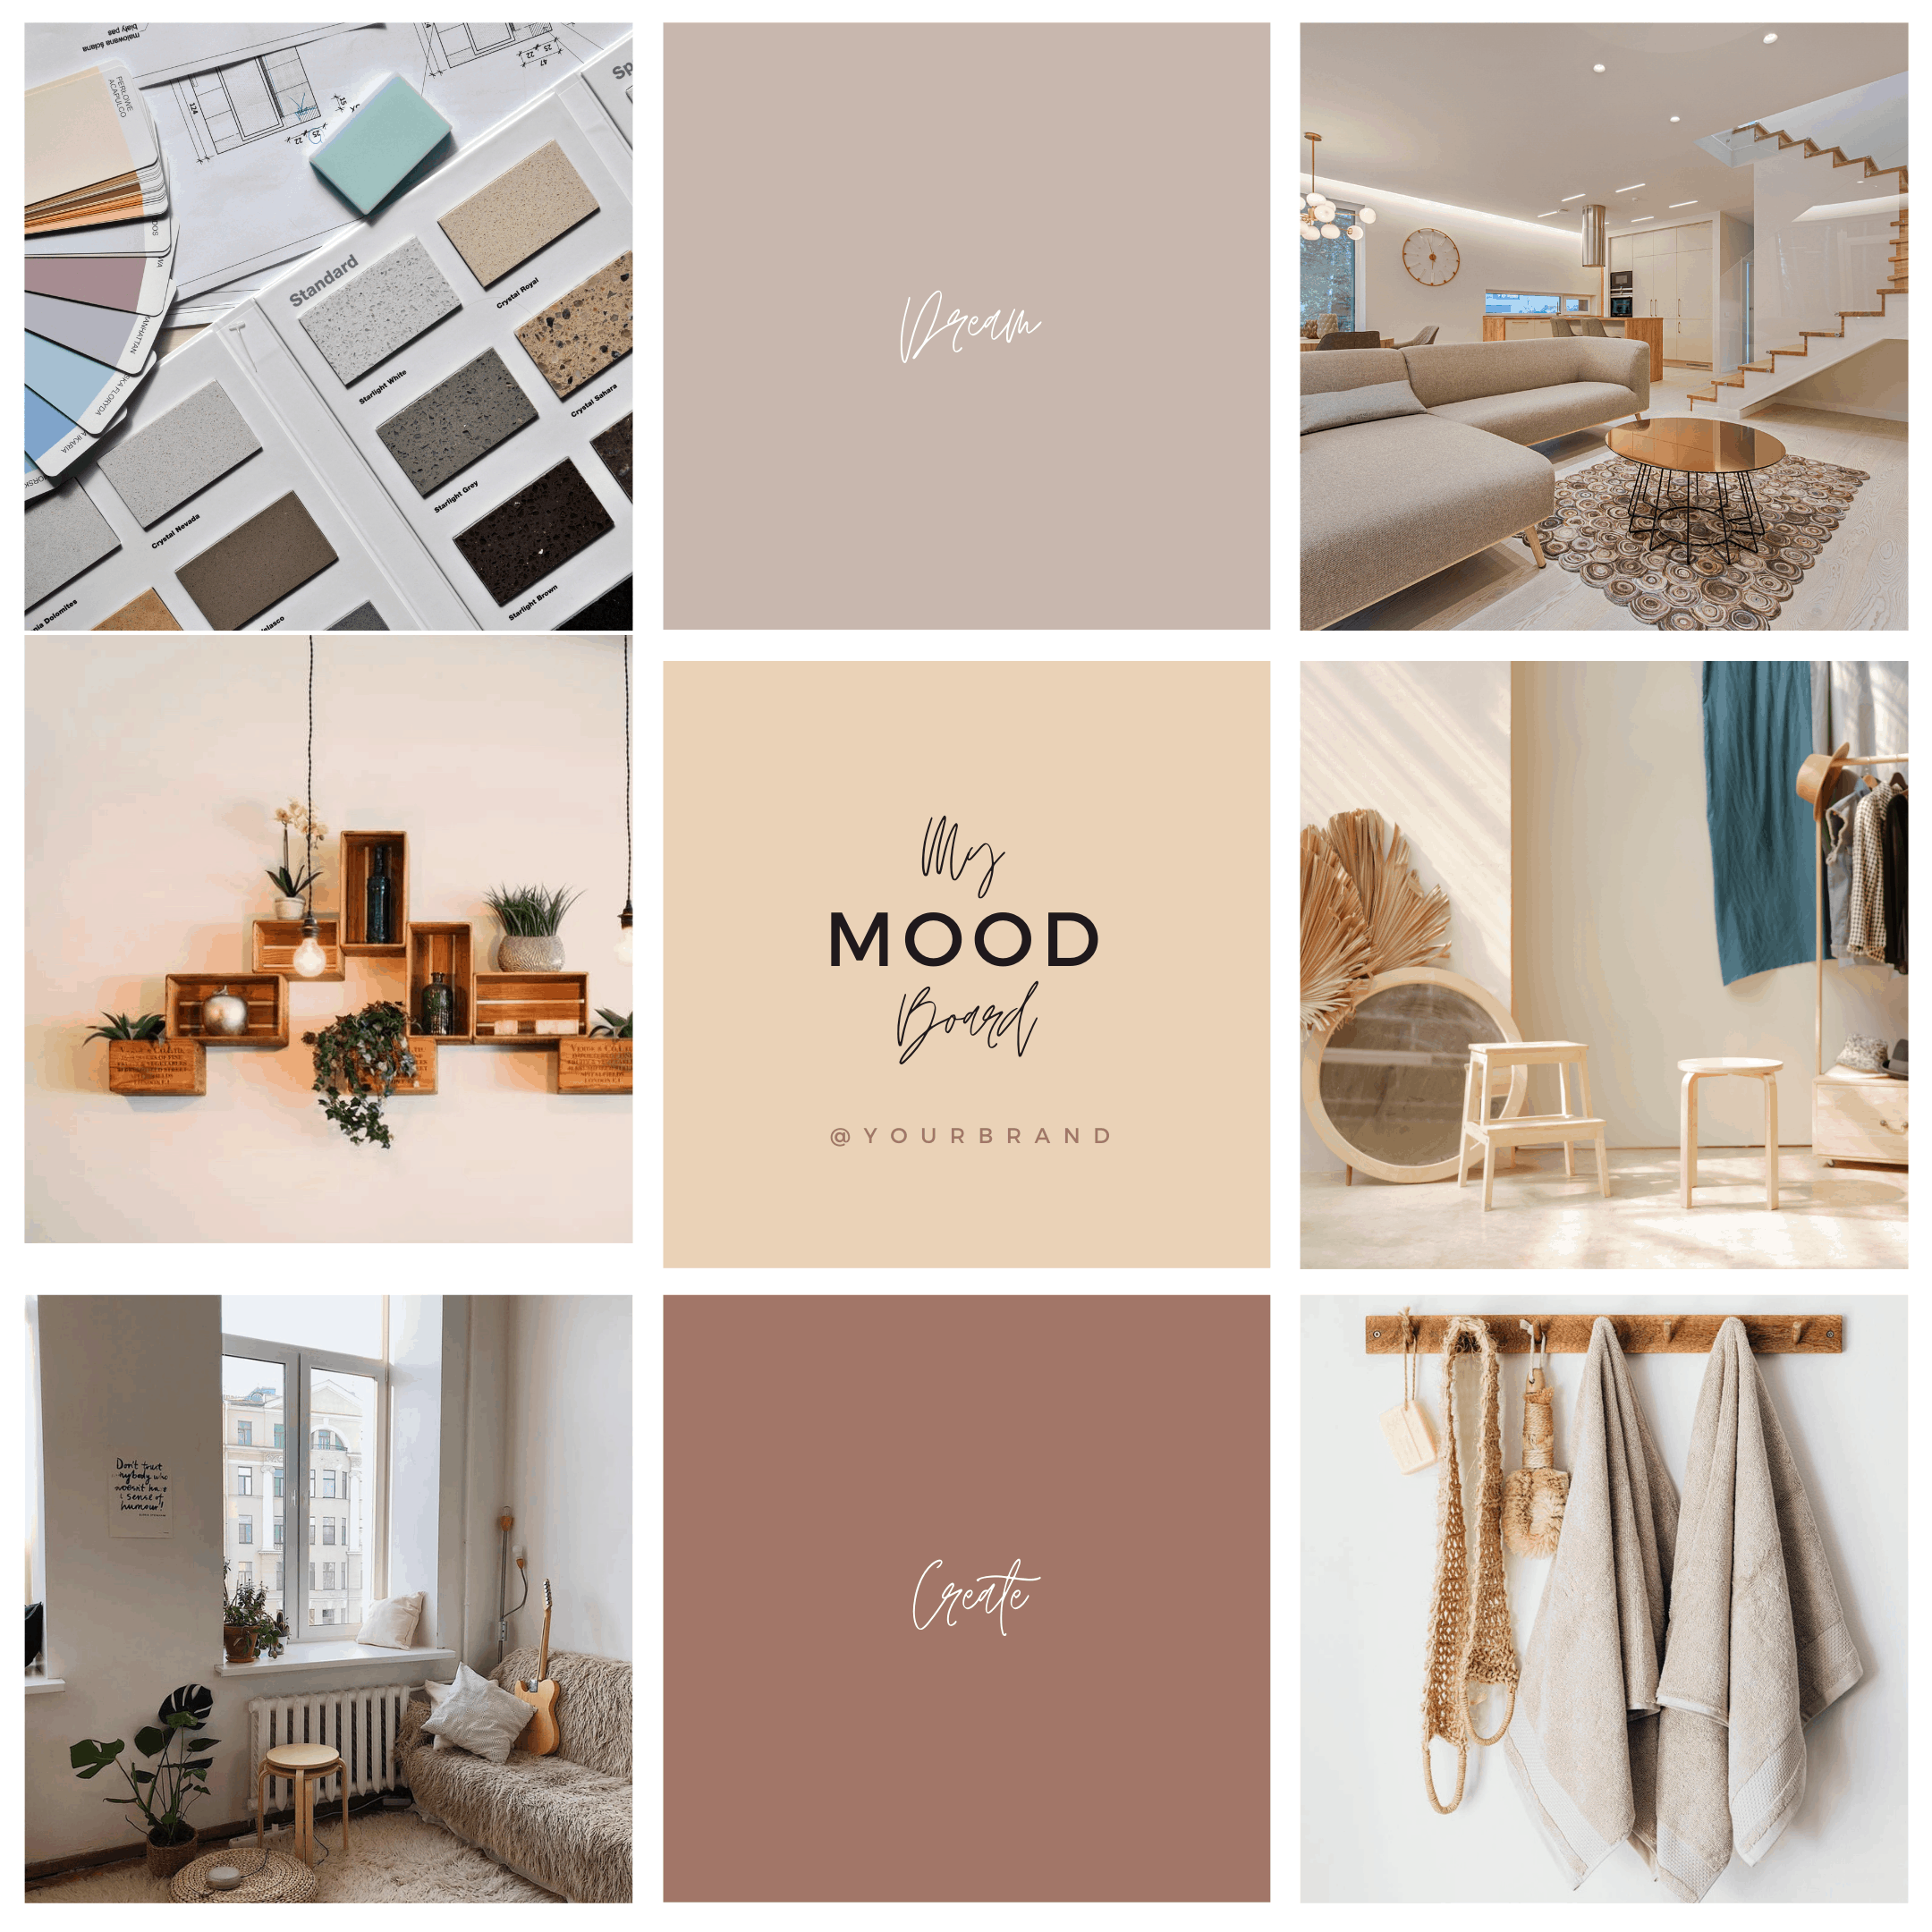 Create An Interior Design Mood Board With A Color Palette | lupon.gov.ph